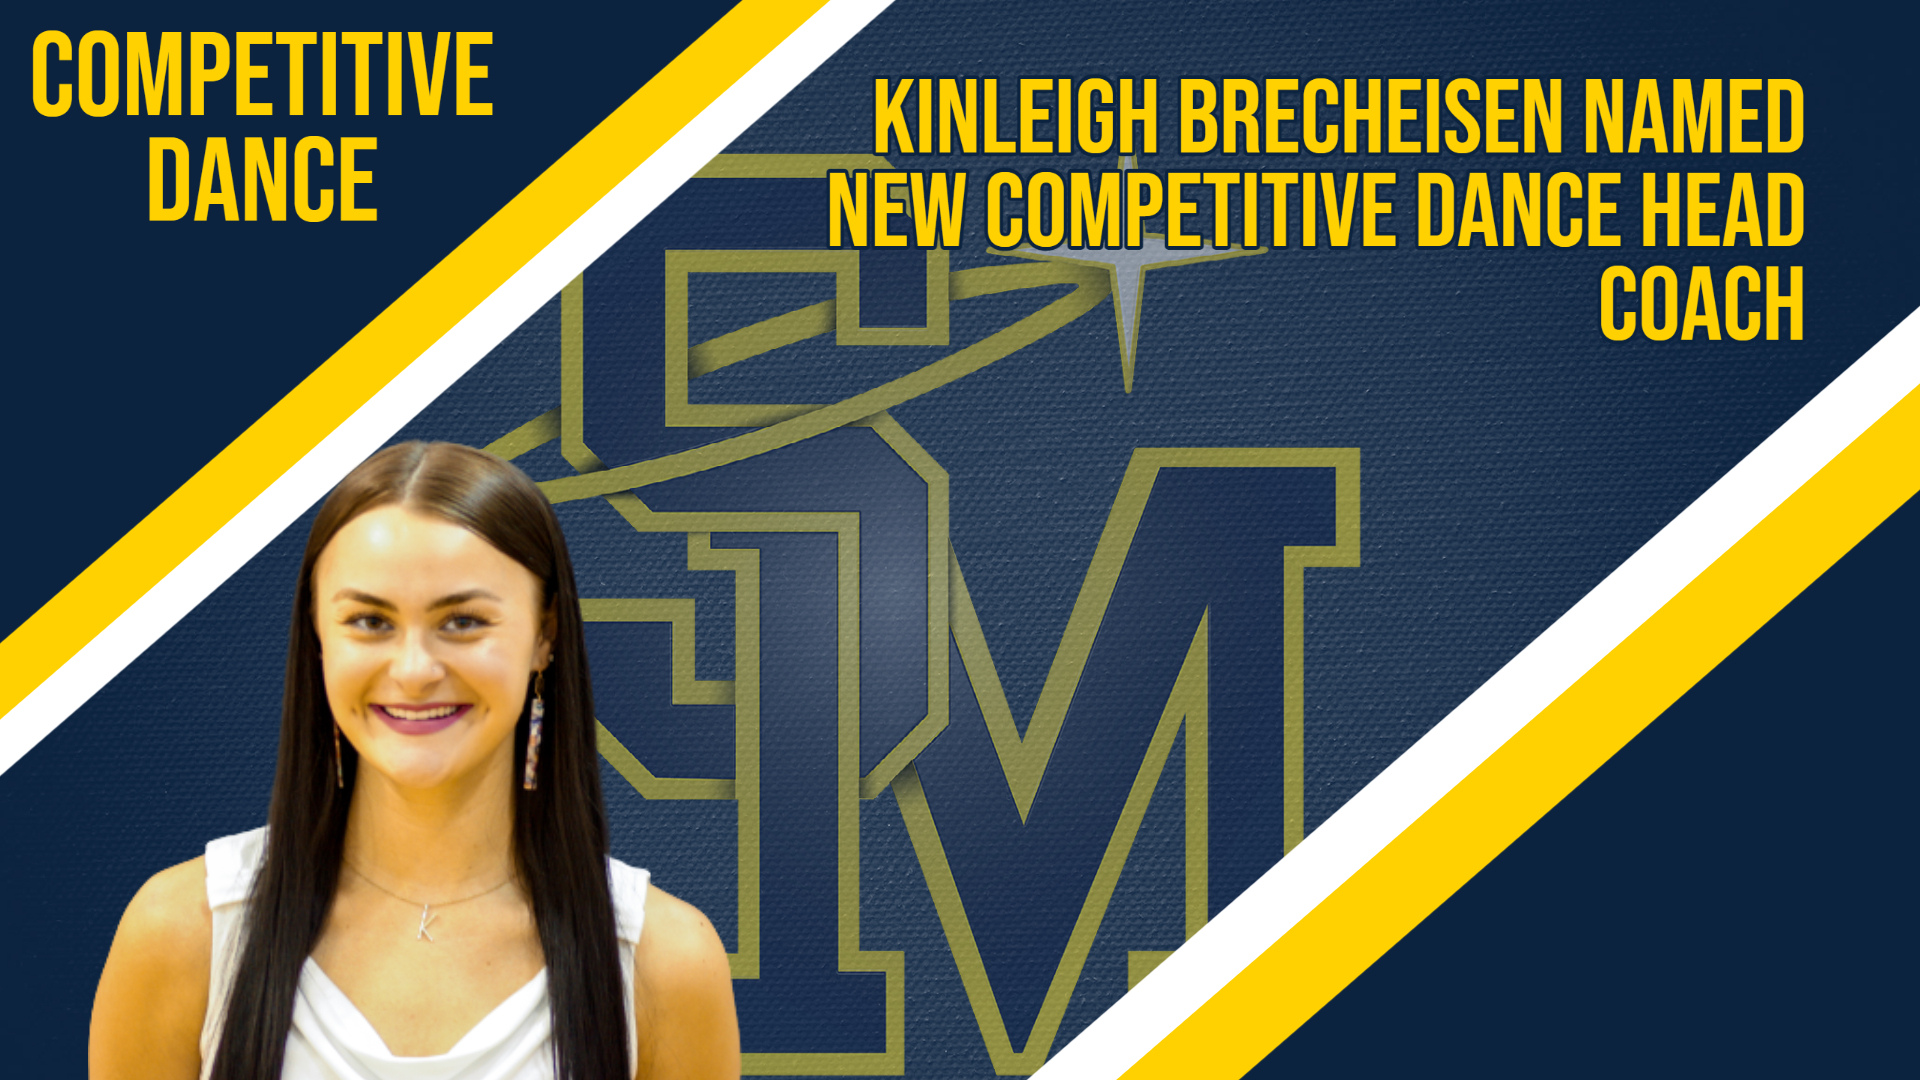 Brecheisen Hired as New Competitive Dance Head Coach